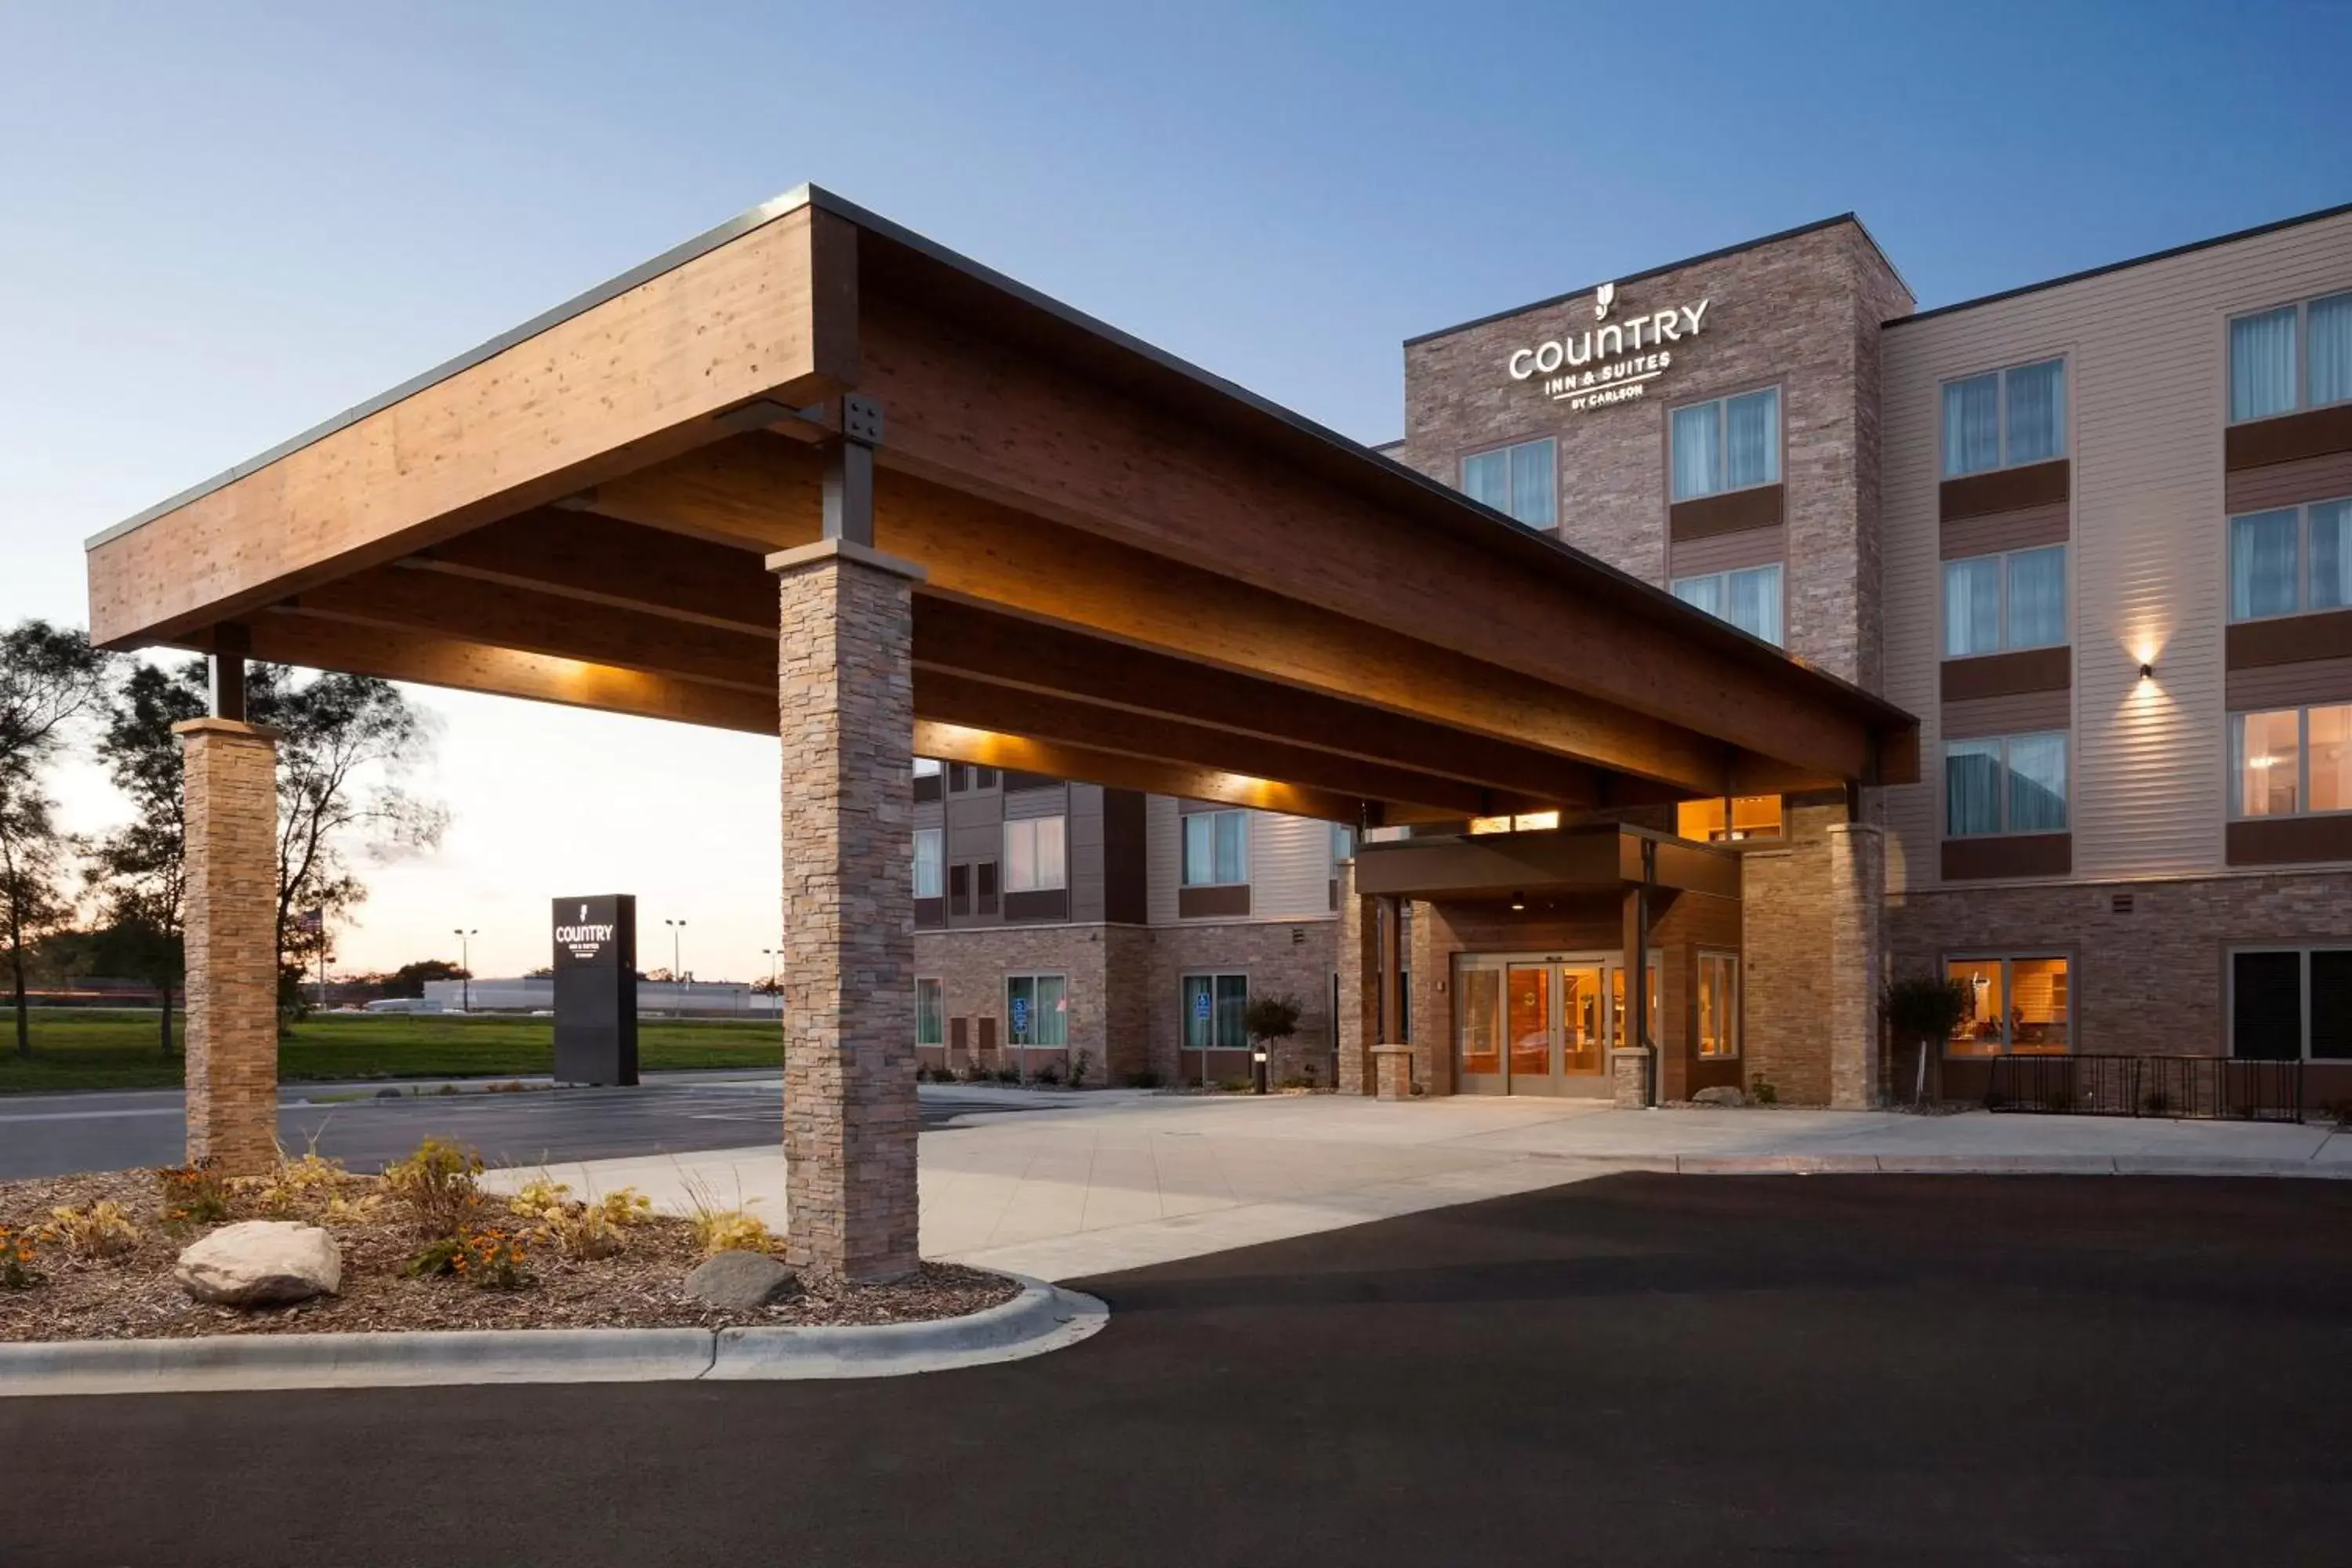 Facade/entrance in Country Inn & Suites by Radisson, Indianola, IA